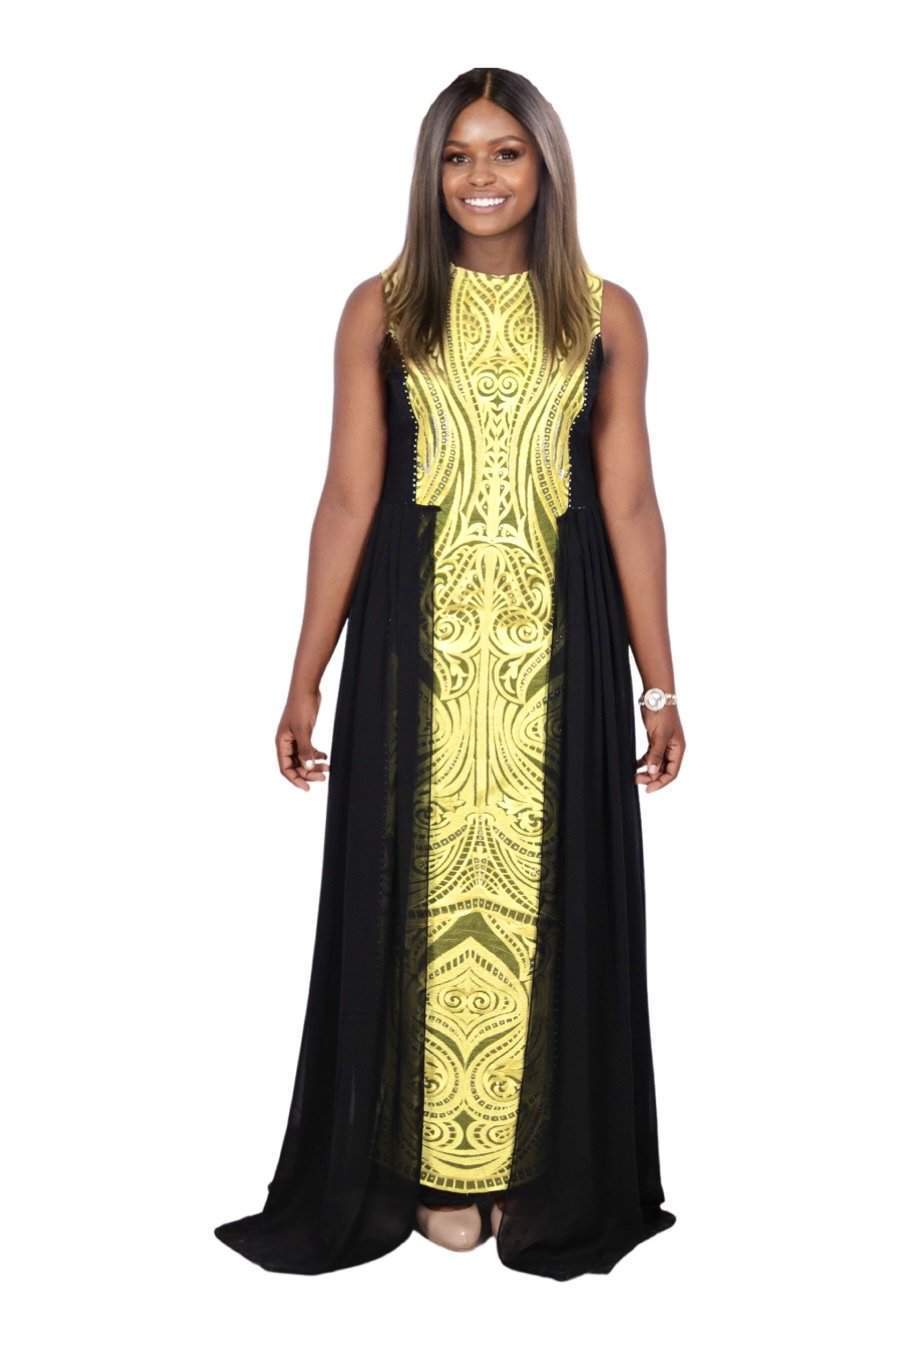 African Evening Black and Yellow Dress-danddclothing-Classic Elegant Gowns,Evening Dresses,Long